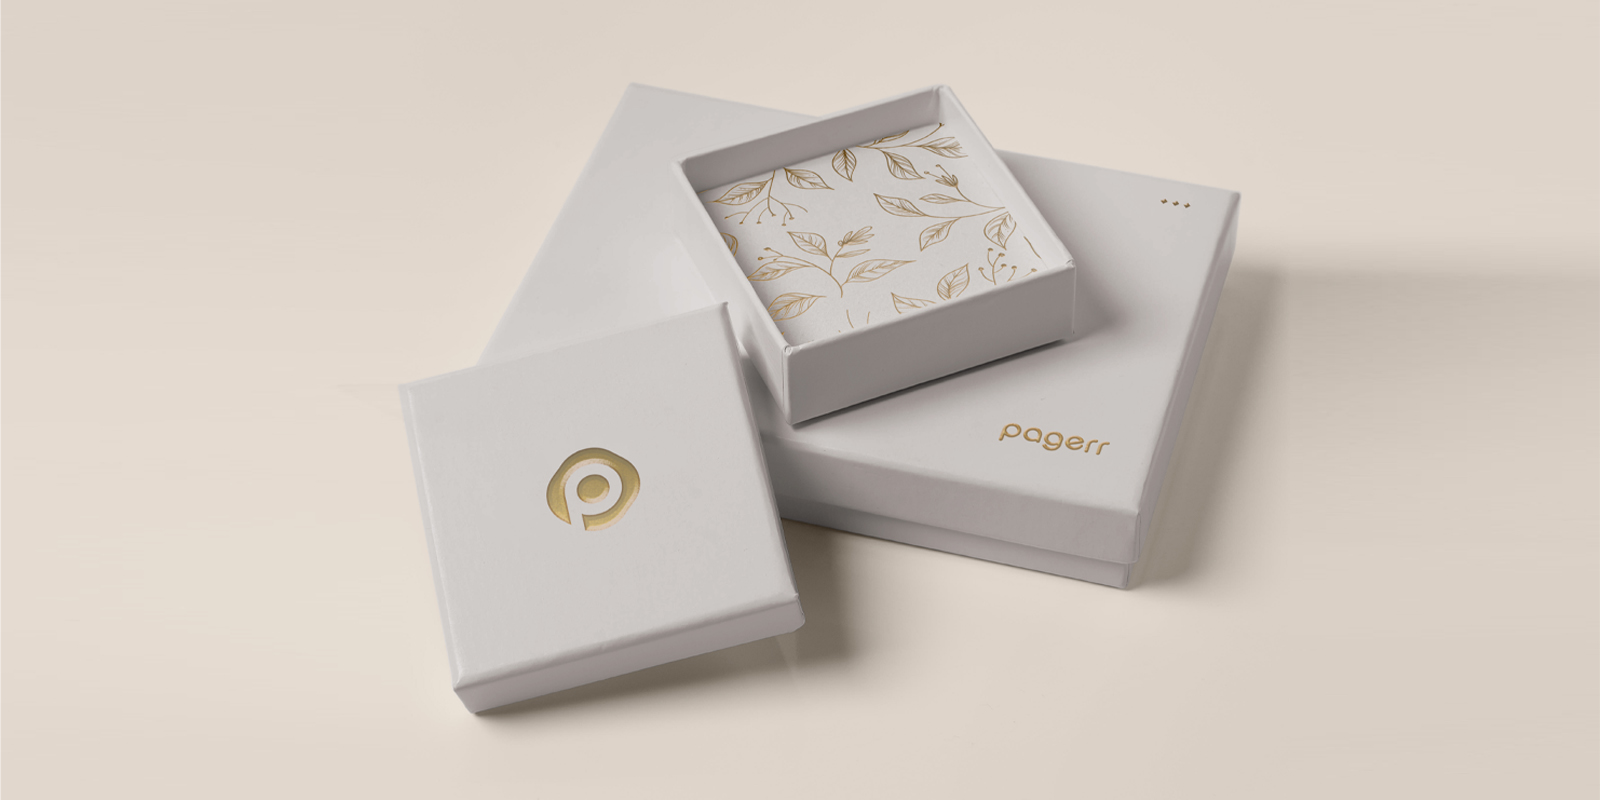 Product boxes in Valencia - Print with Pagerr